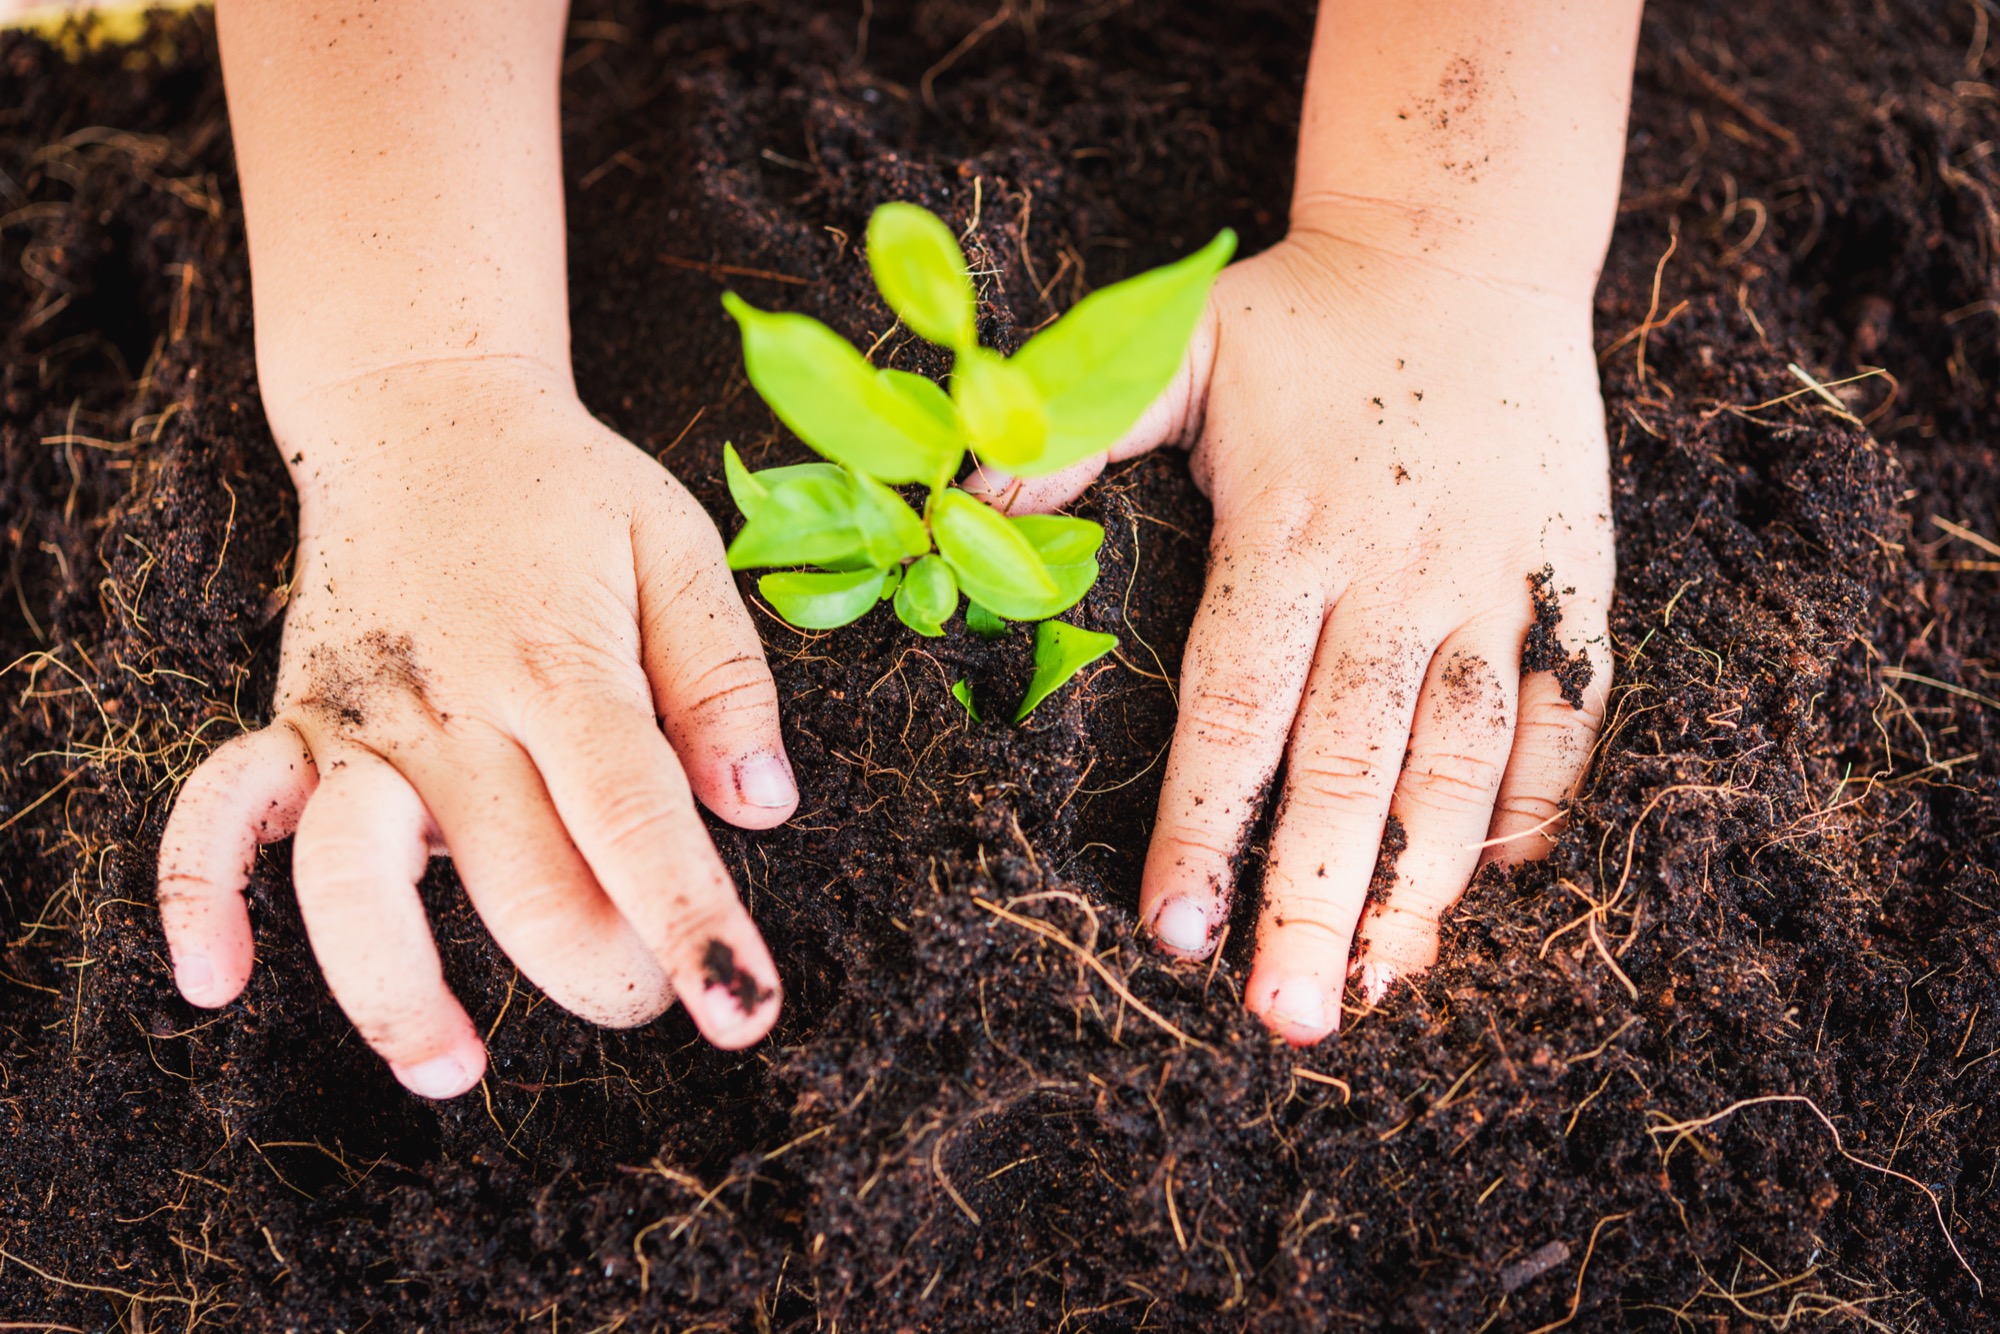 Hands patting the soil around a newly planted sprout